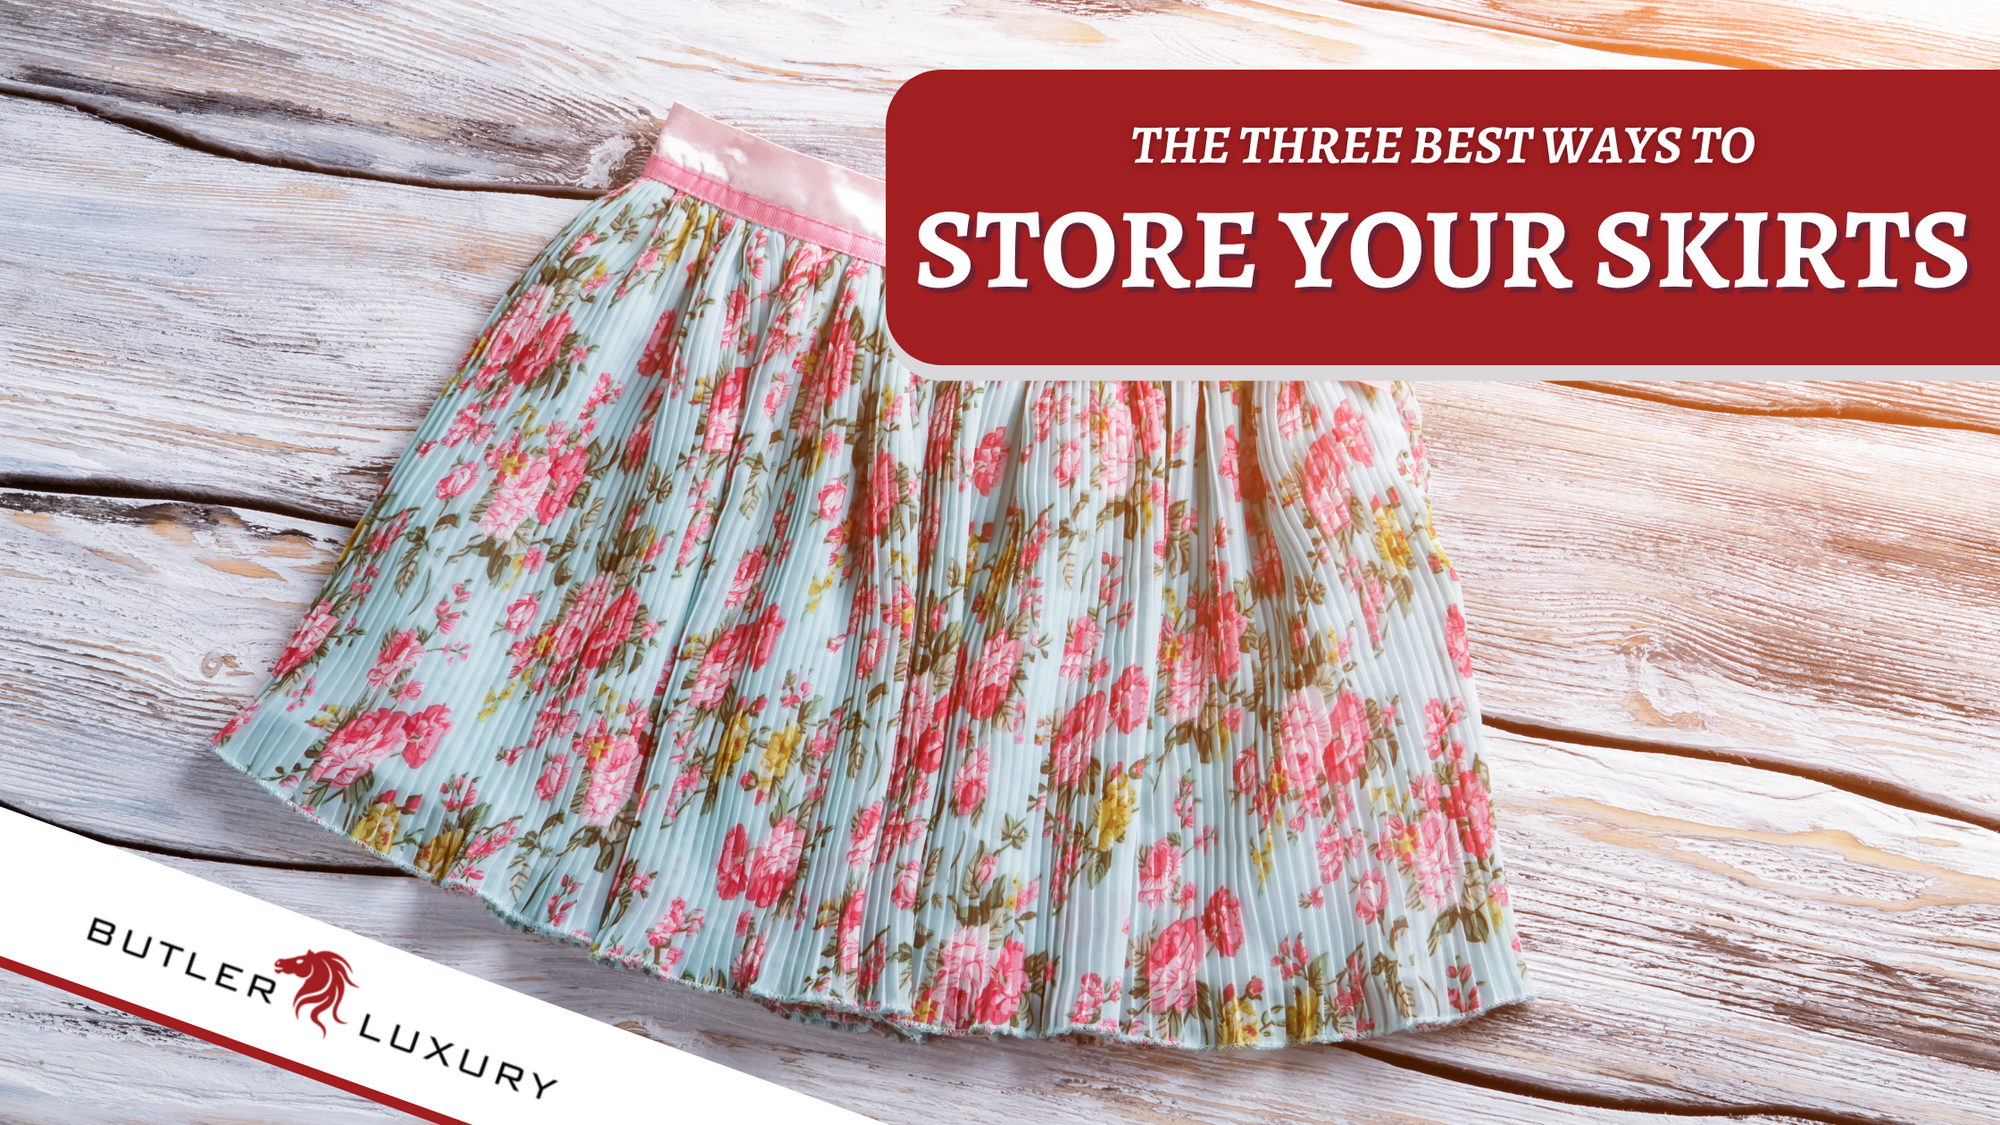 The 3 Best Ways to Store Your Skirts